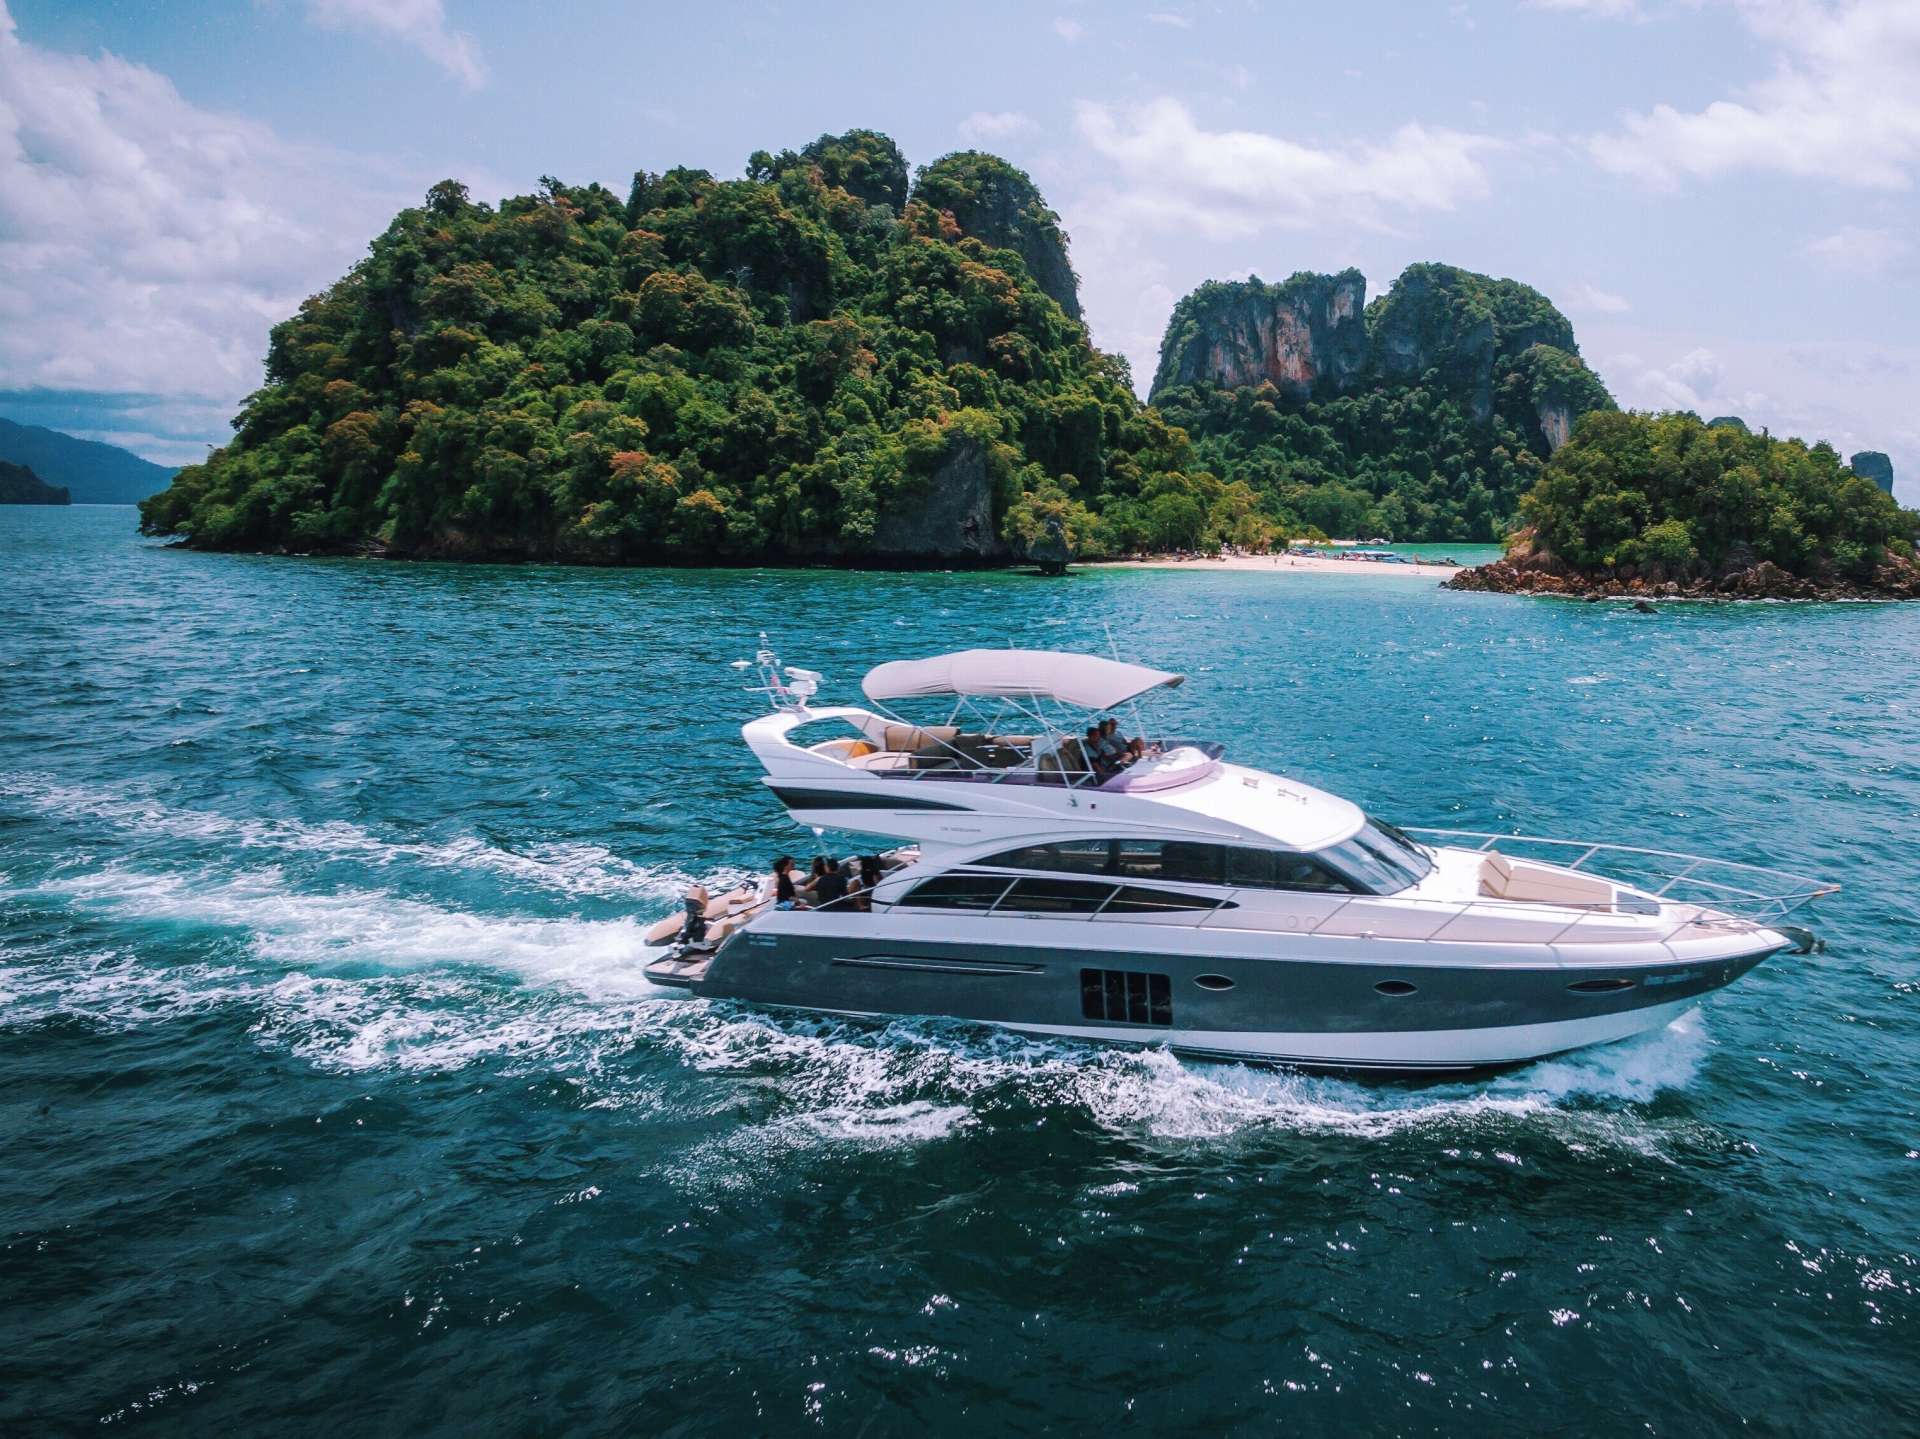 mayavee - Yacht Charter Philippines & Boat hire in SE Asia 1